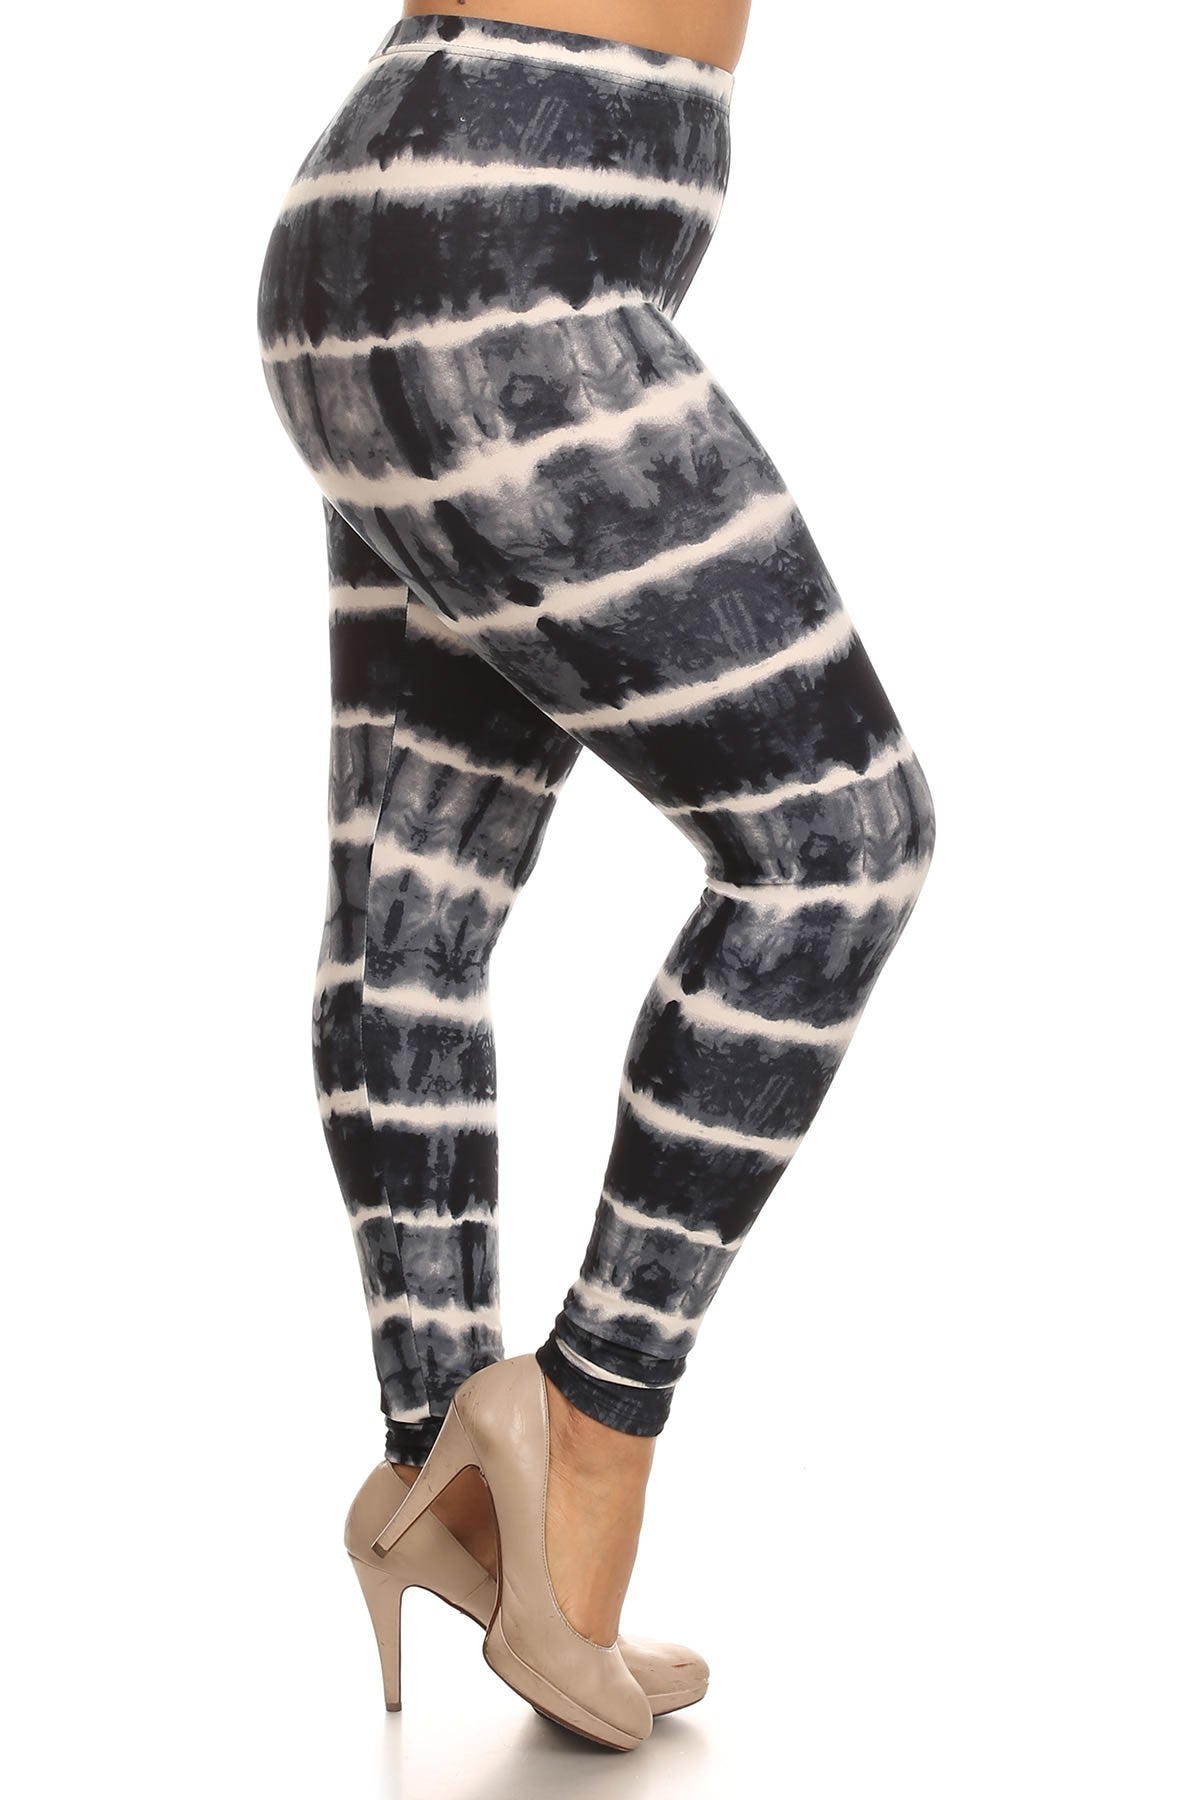 Plus Size Tie Dye Print, Full Length Leggings In A Fitted Style With A Banded High Waist - K I T S H O P 